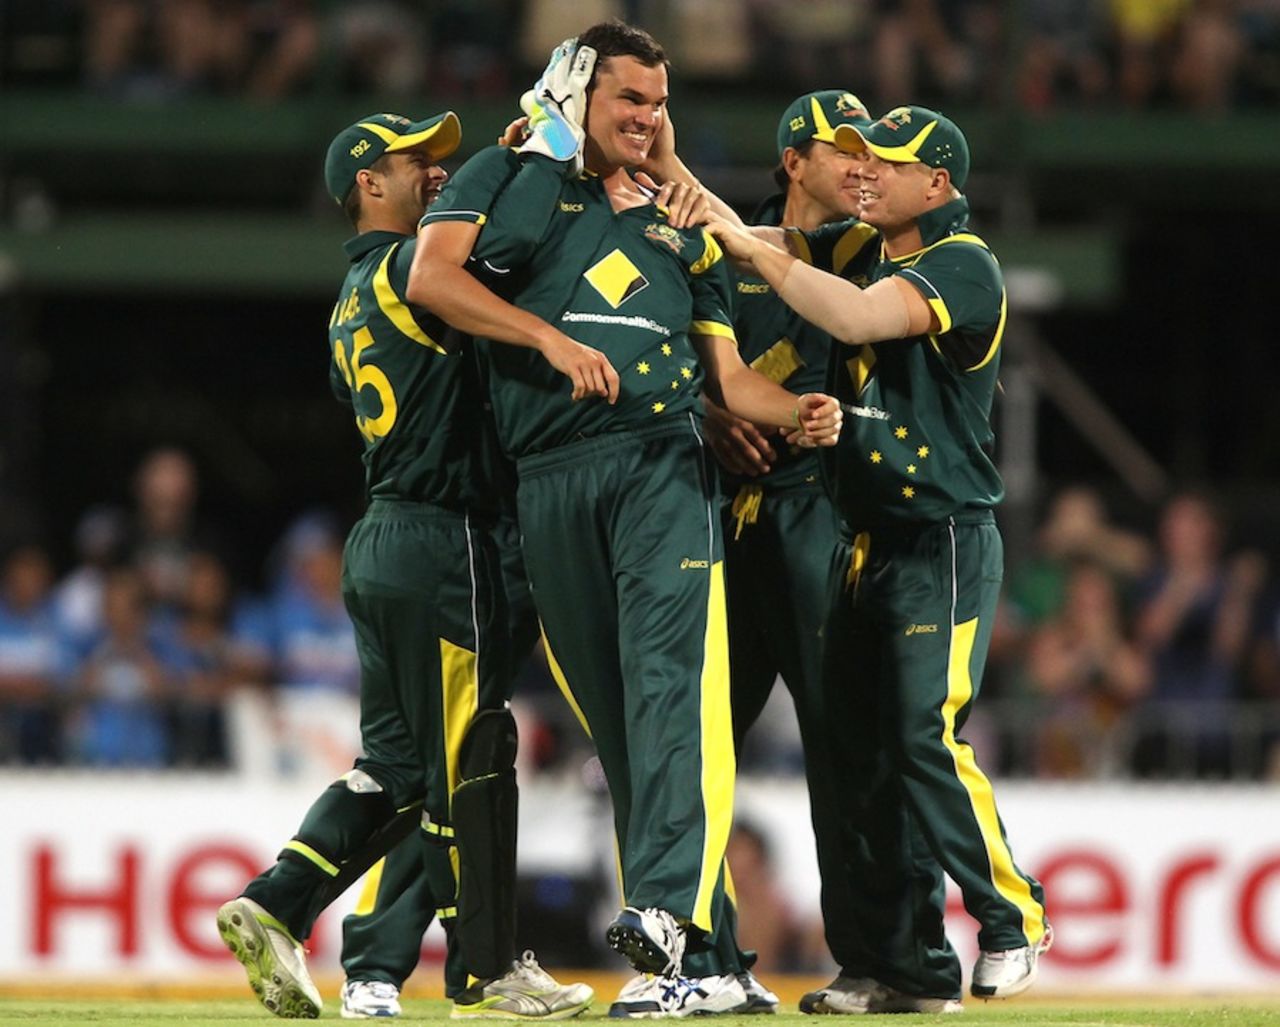 Clint McKay took 3 for 53, Australia v India, Commonwealth Bank Series, Adelaide, February 12, 2012
